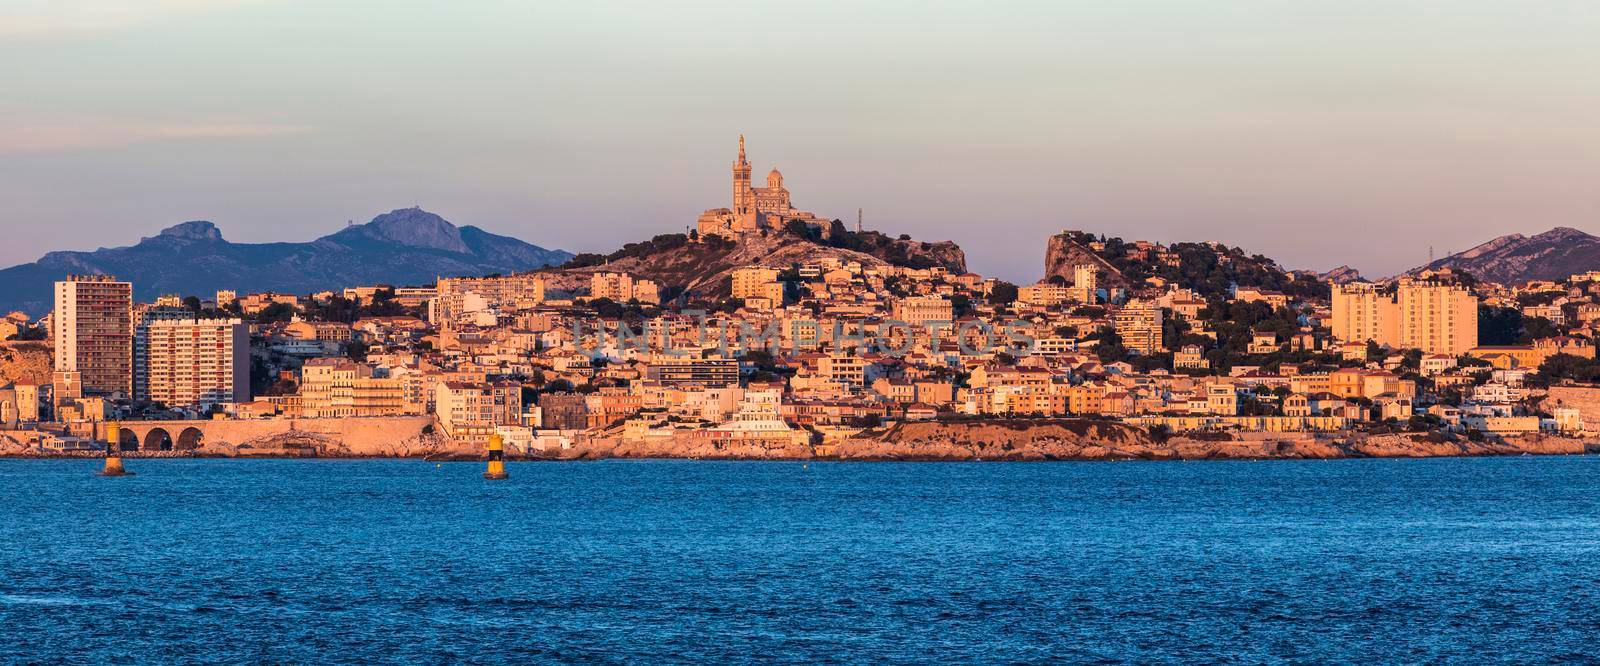 Marseille panorama from Frioul archipelago by benkrut